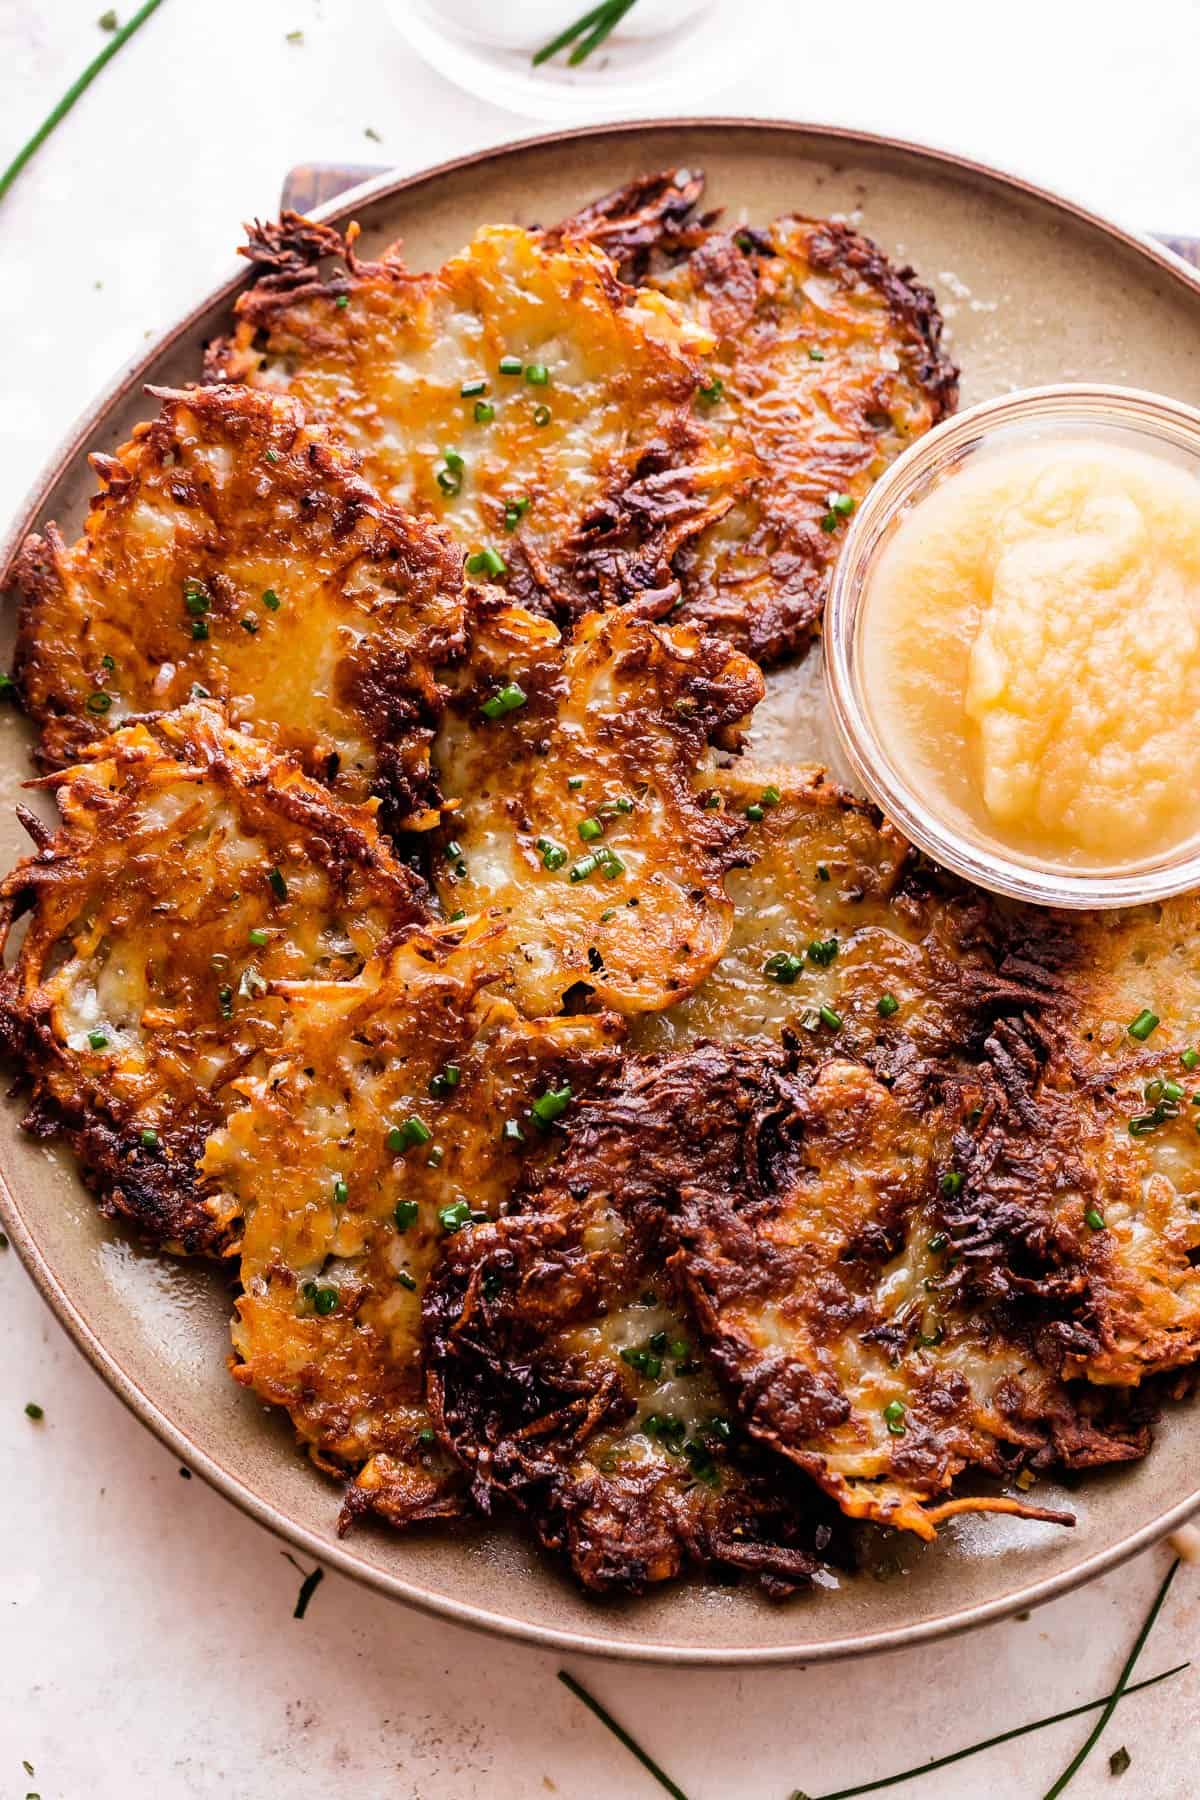 potato latkes arranged on a light brown plate with a small bowl of applesauce placed next to the latkes, and a bowl of sour cream near the plate.